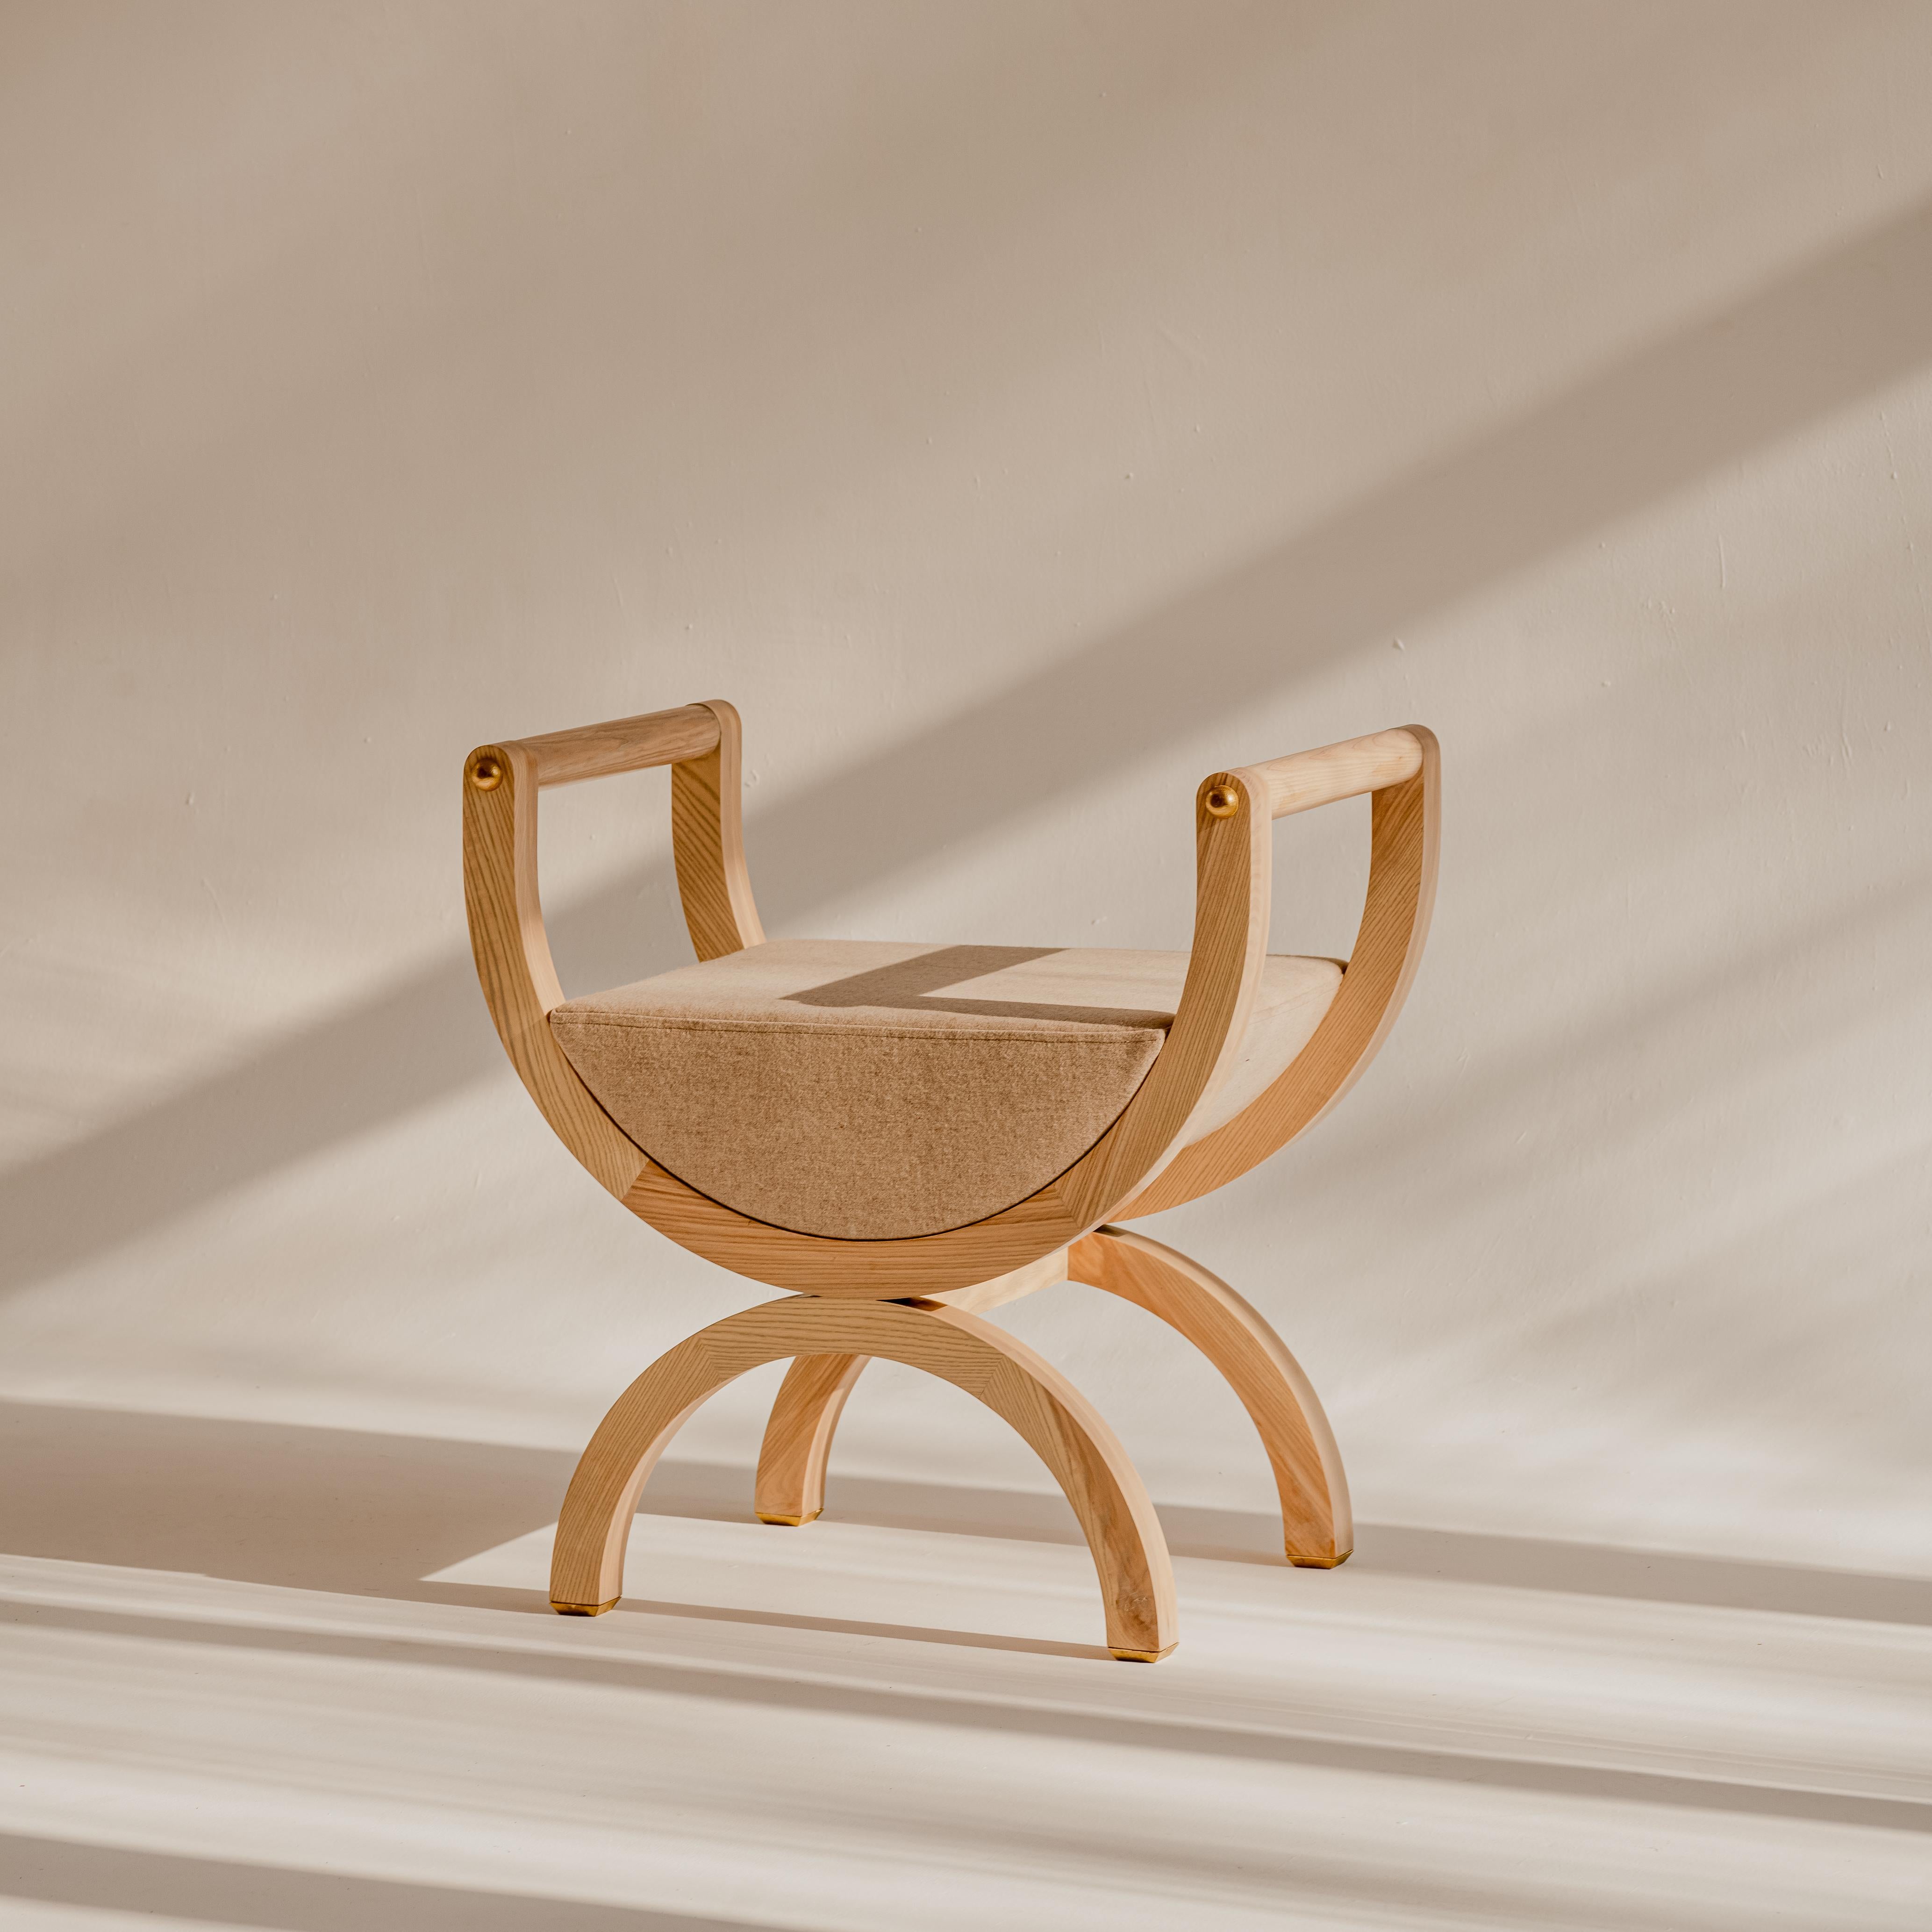 Square drop light Curule chair by Nów
Designed by Square Drop 
Dimensions: D 46 x W 67 x H 69.5 cm
Materials: stained, solid ash wood, brass hardware, natural wool seat

Agnieszka Sniadewicz-Swica, owner of Square Drop restoration lab, has been